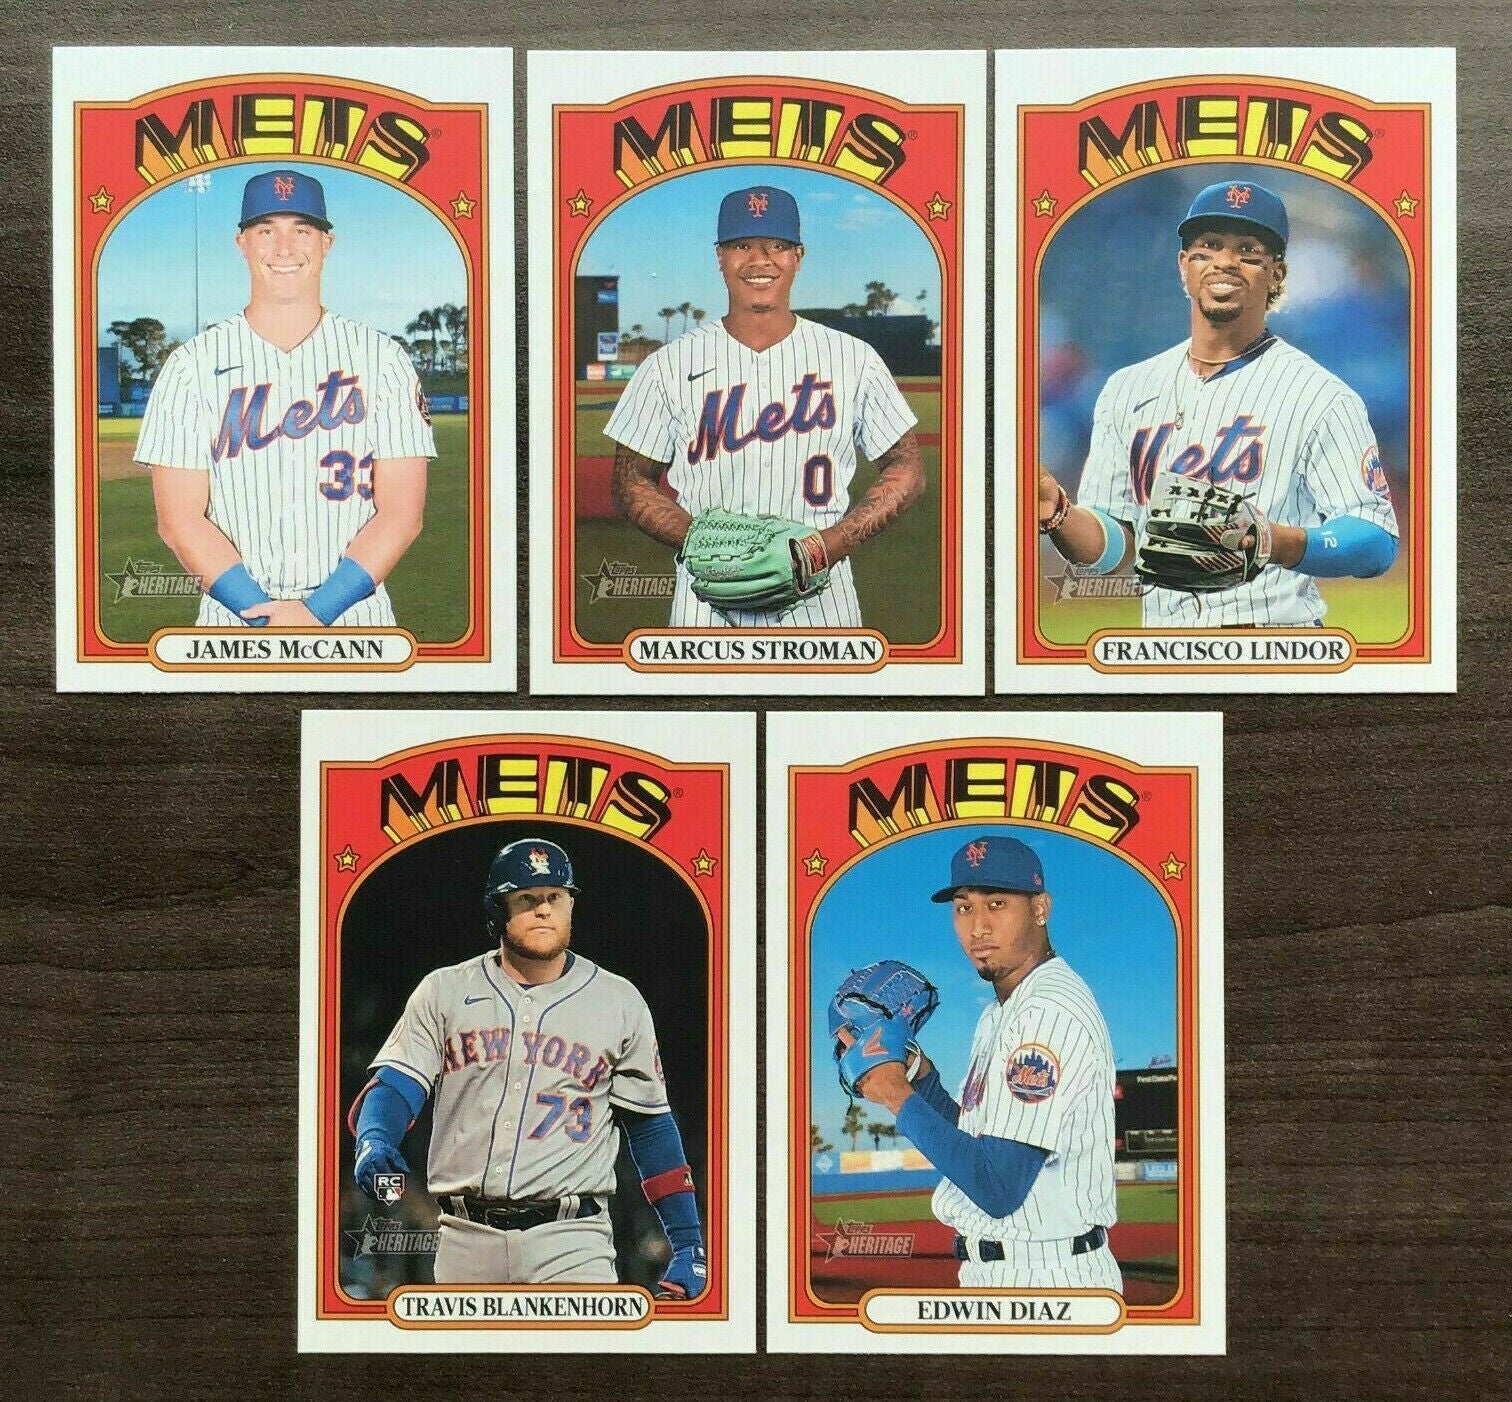  New York Mets/Complete 2021 Topps Baseball Team Set (Series 1)  with (12) Cards. ***PLUS (10) Bonus Mets Cards 2020/2019*** : Everything  Else